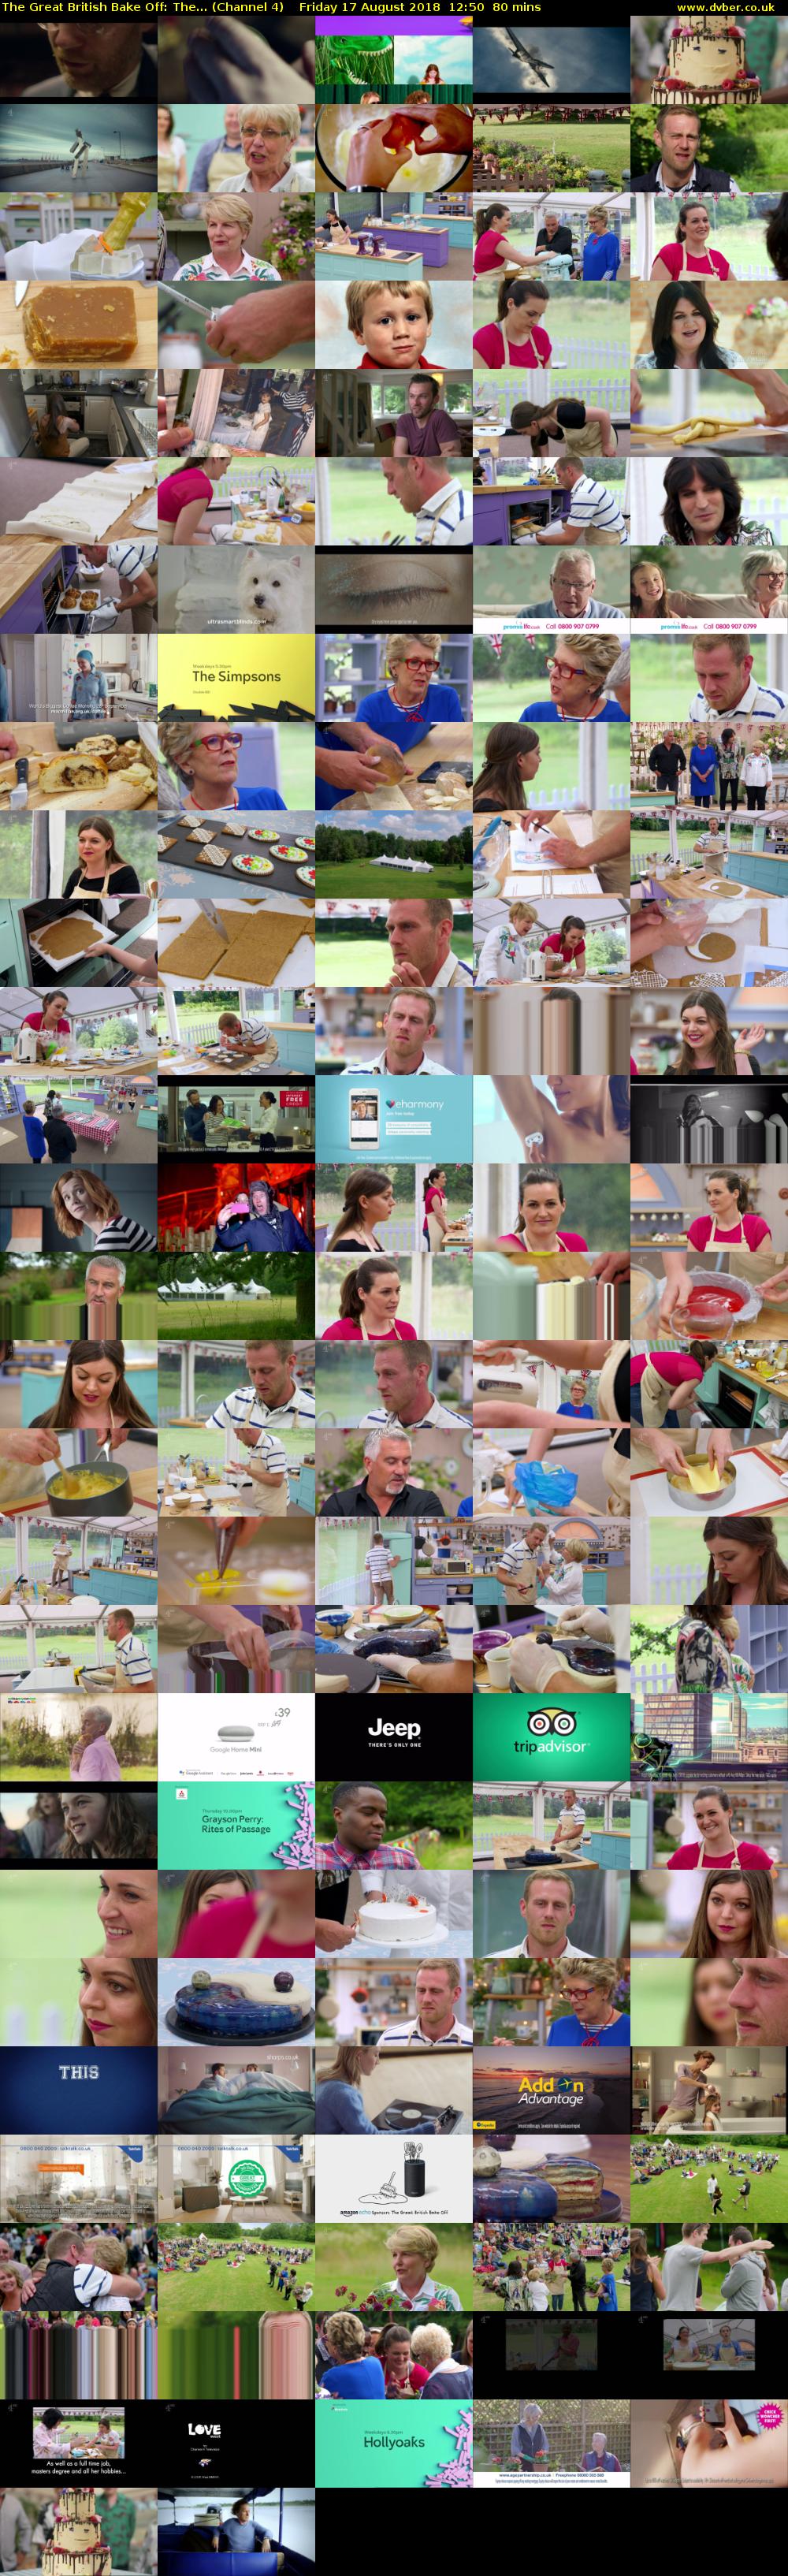 The Great British Bake Off: The... (Channel 4) Friday 17 August 2018 12:50 - 14:10